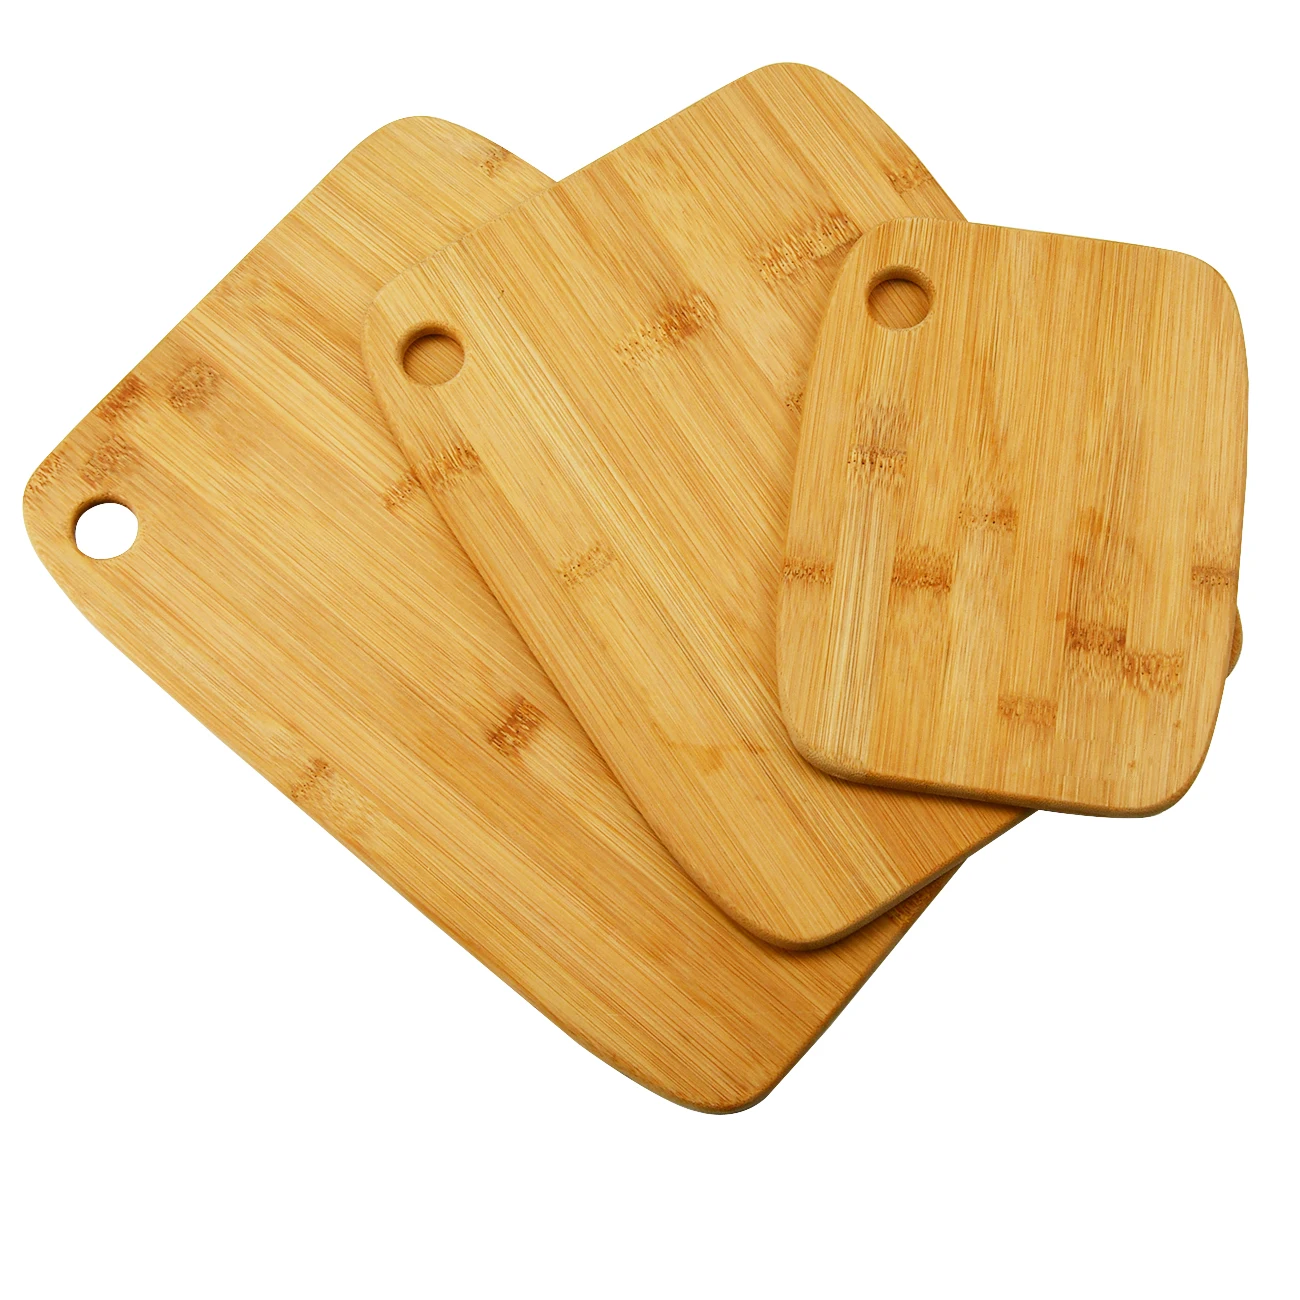 Multi-functional Reversible Recycled Organic Kitchen Board Bamboo Chopping Cutting Board Set Of 3 With Hanging Hole